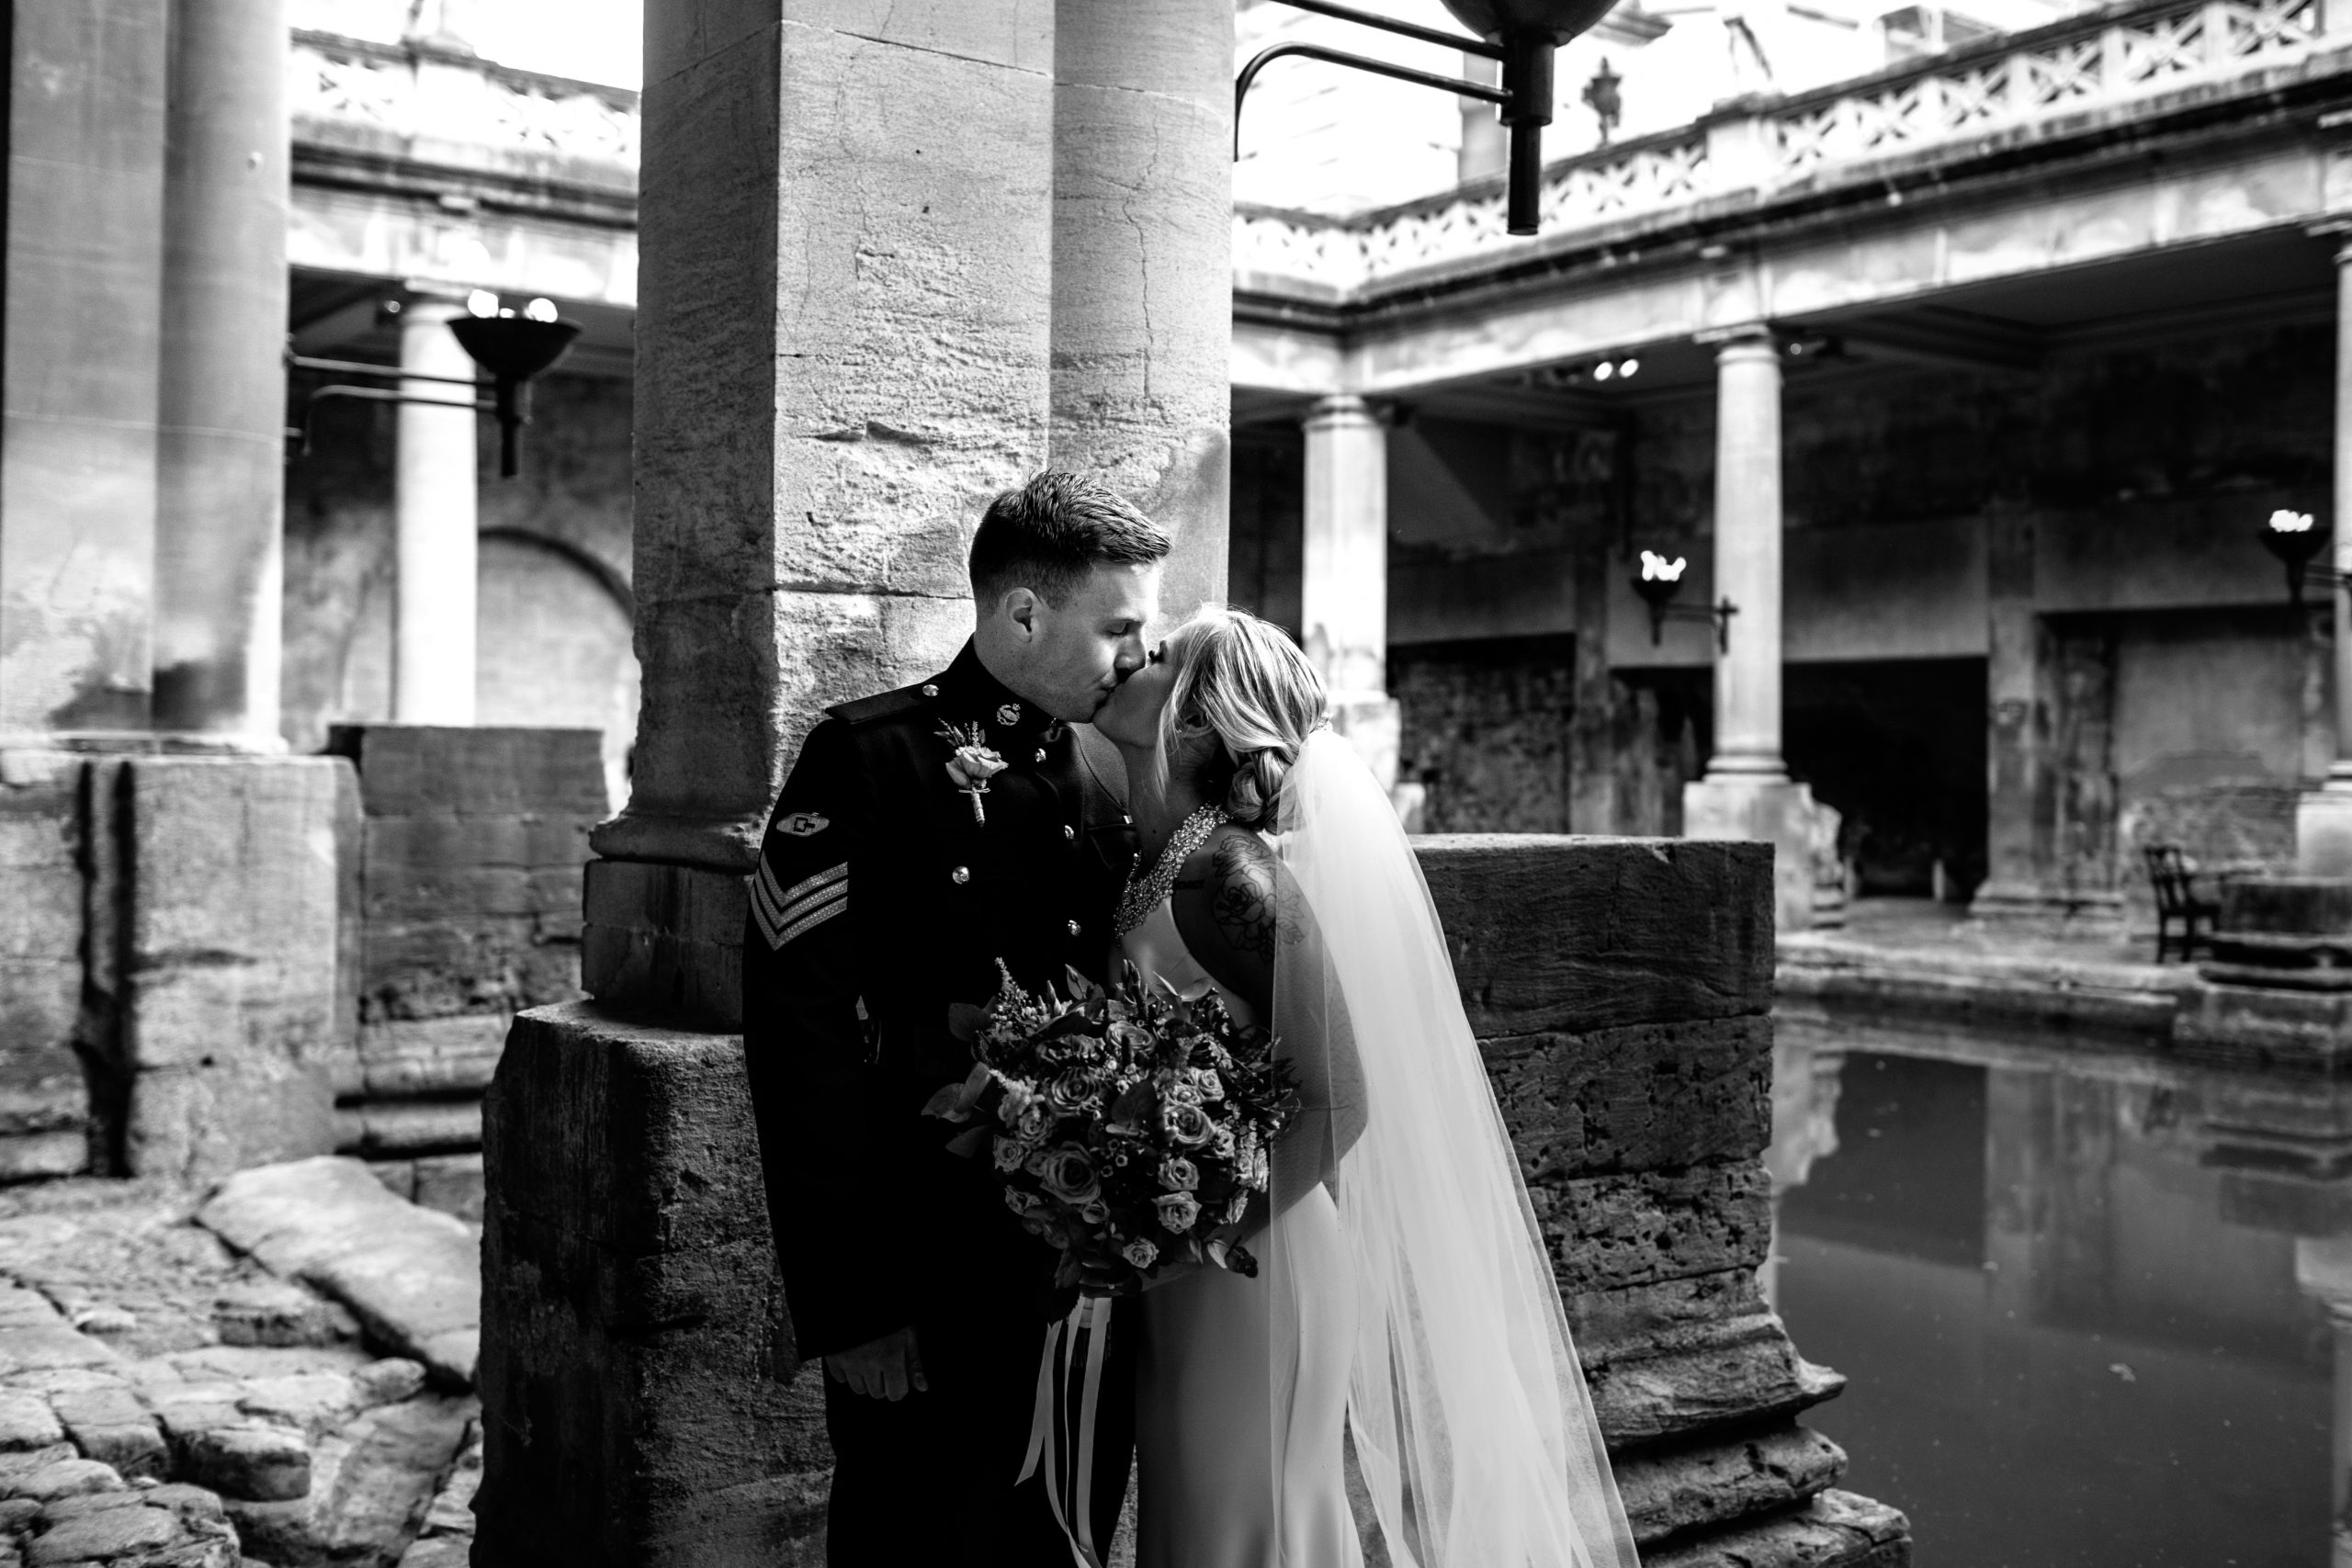 Couple kissing at the Roman Baths after getting married